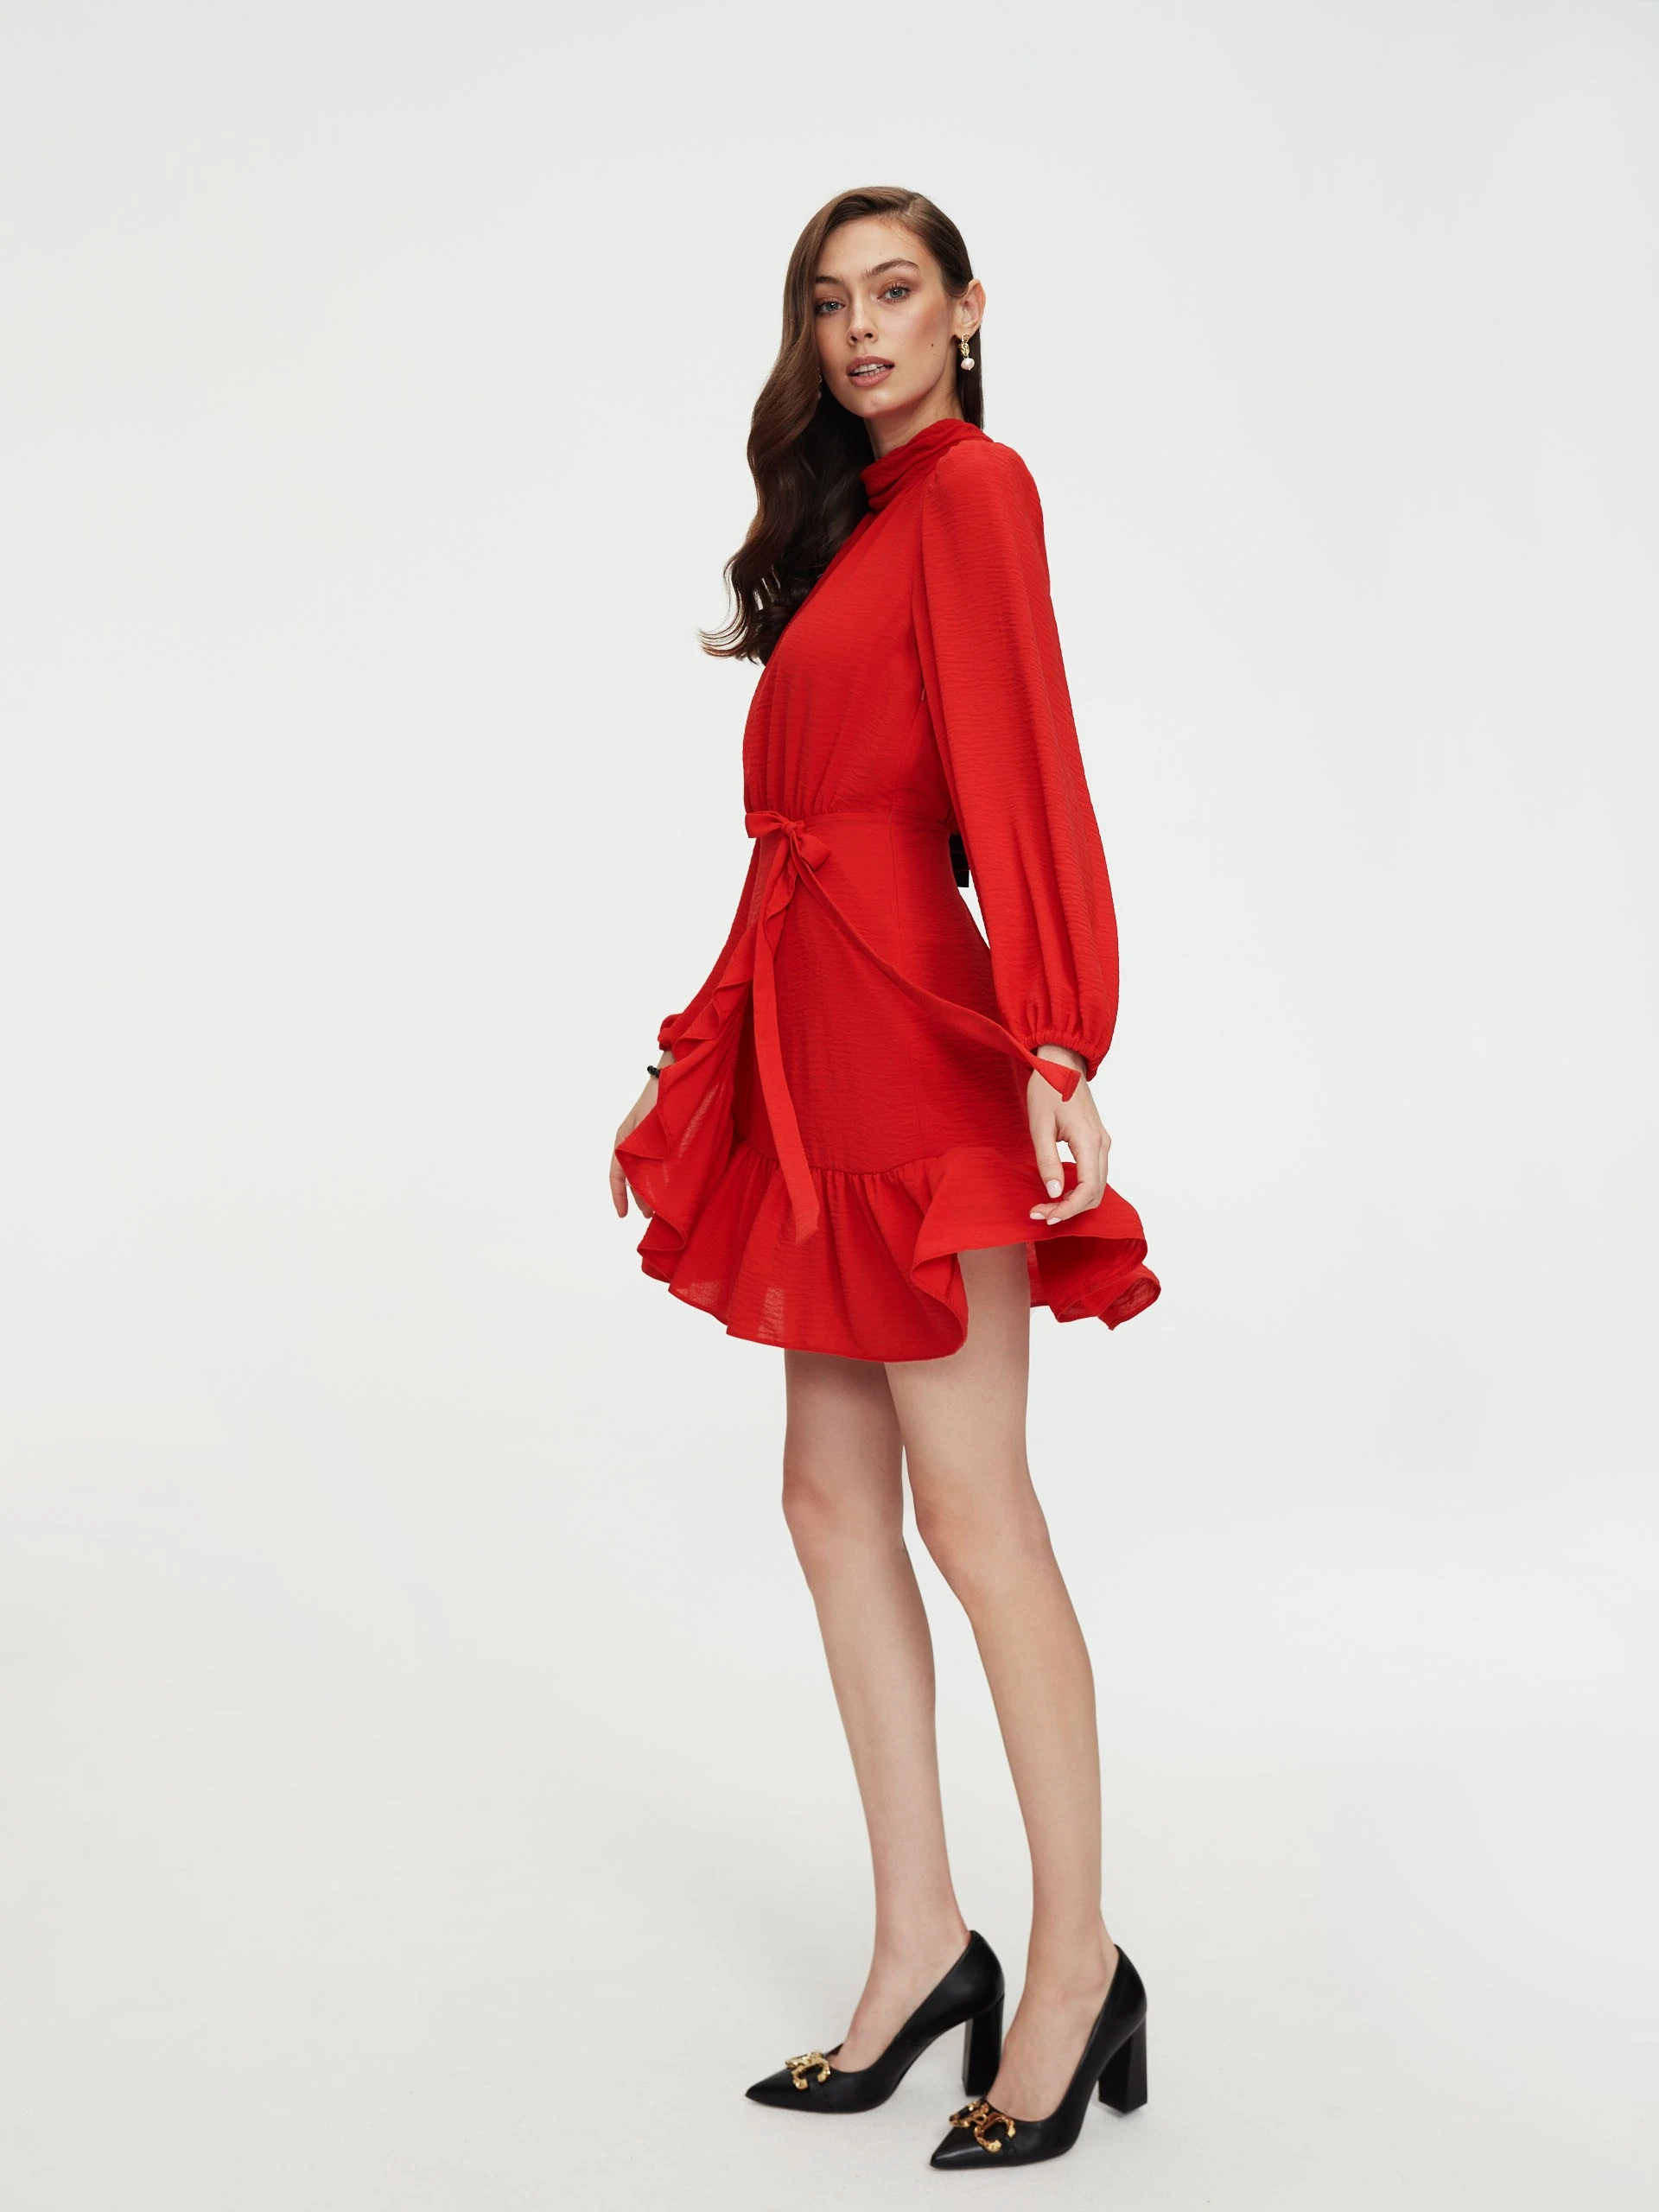 Red dress with frills